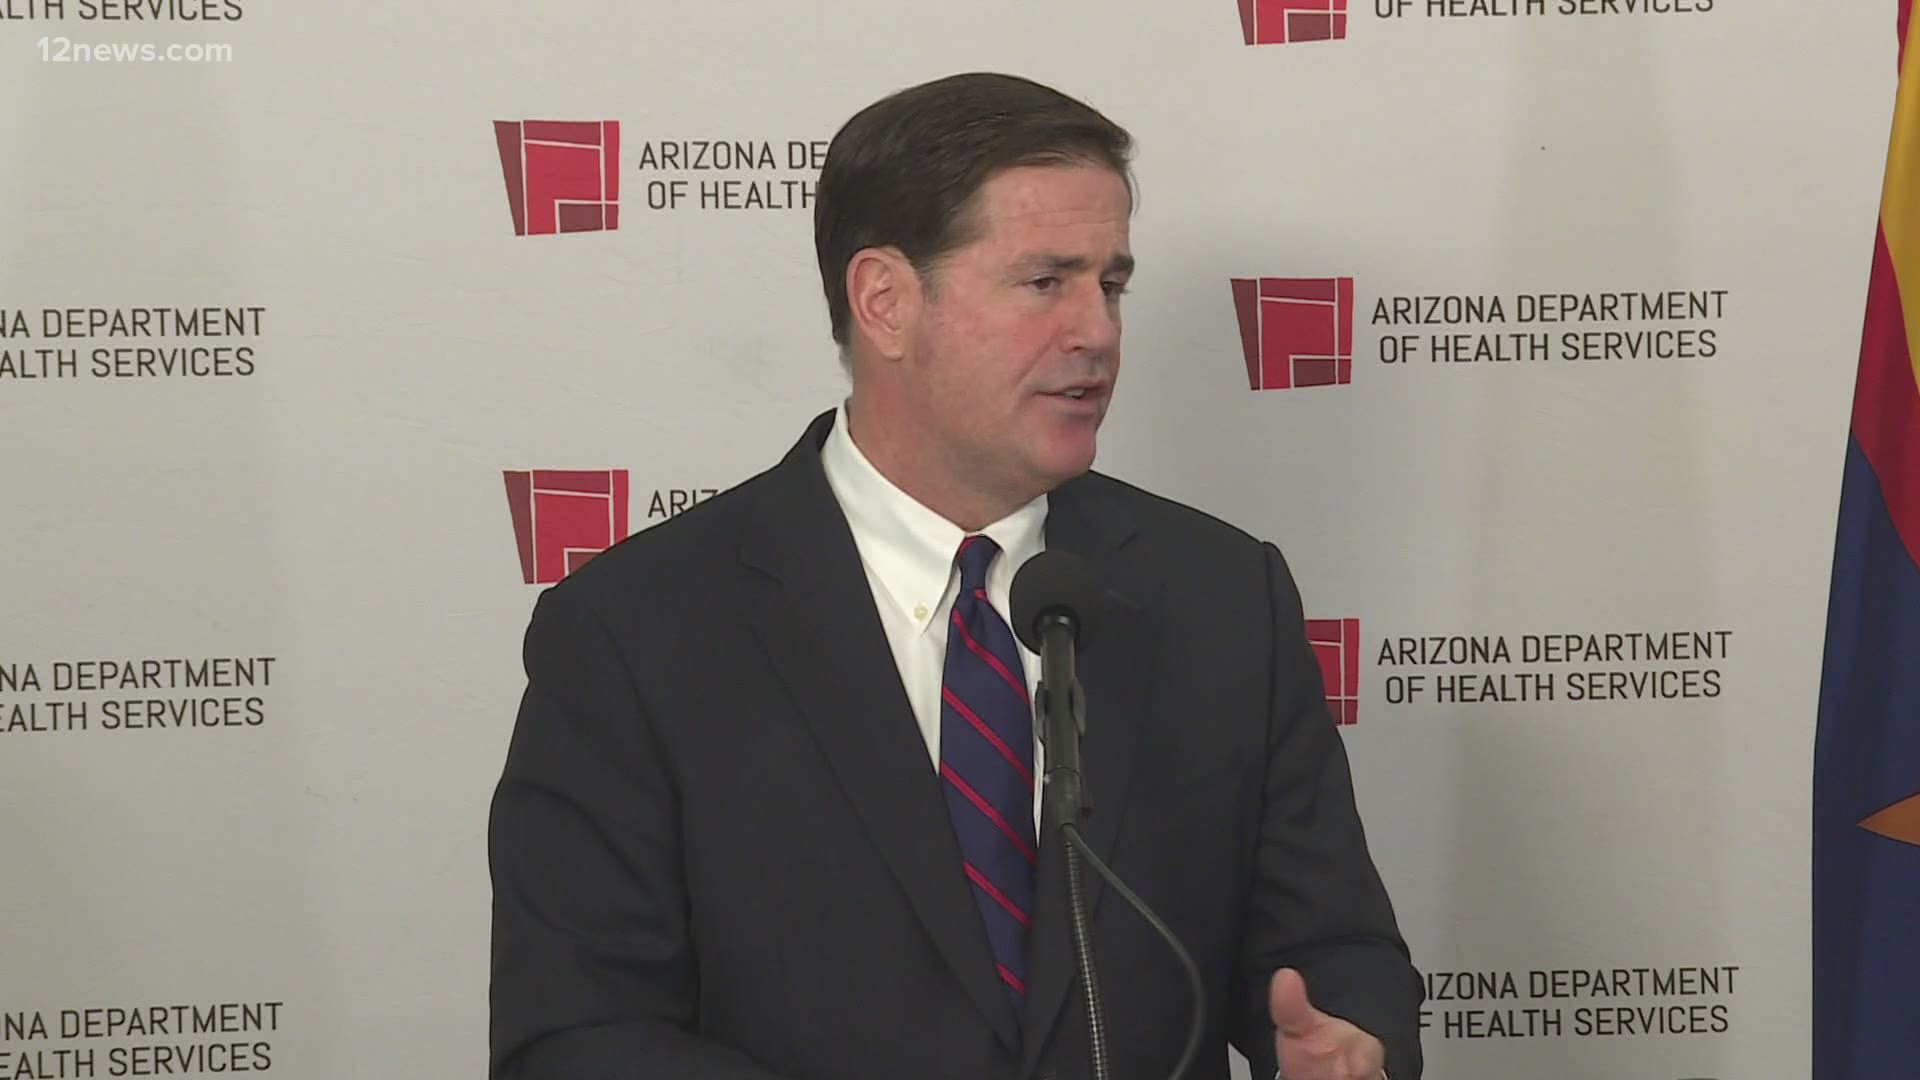 Speaking at a question and answer session with members of the media, Ducey said it’ll be up to each individual school district to abide by the guidelines.